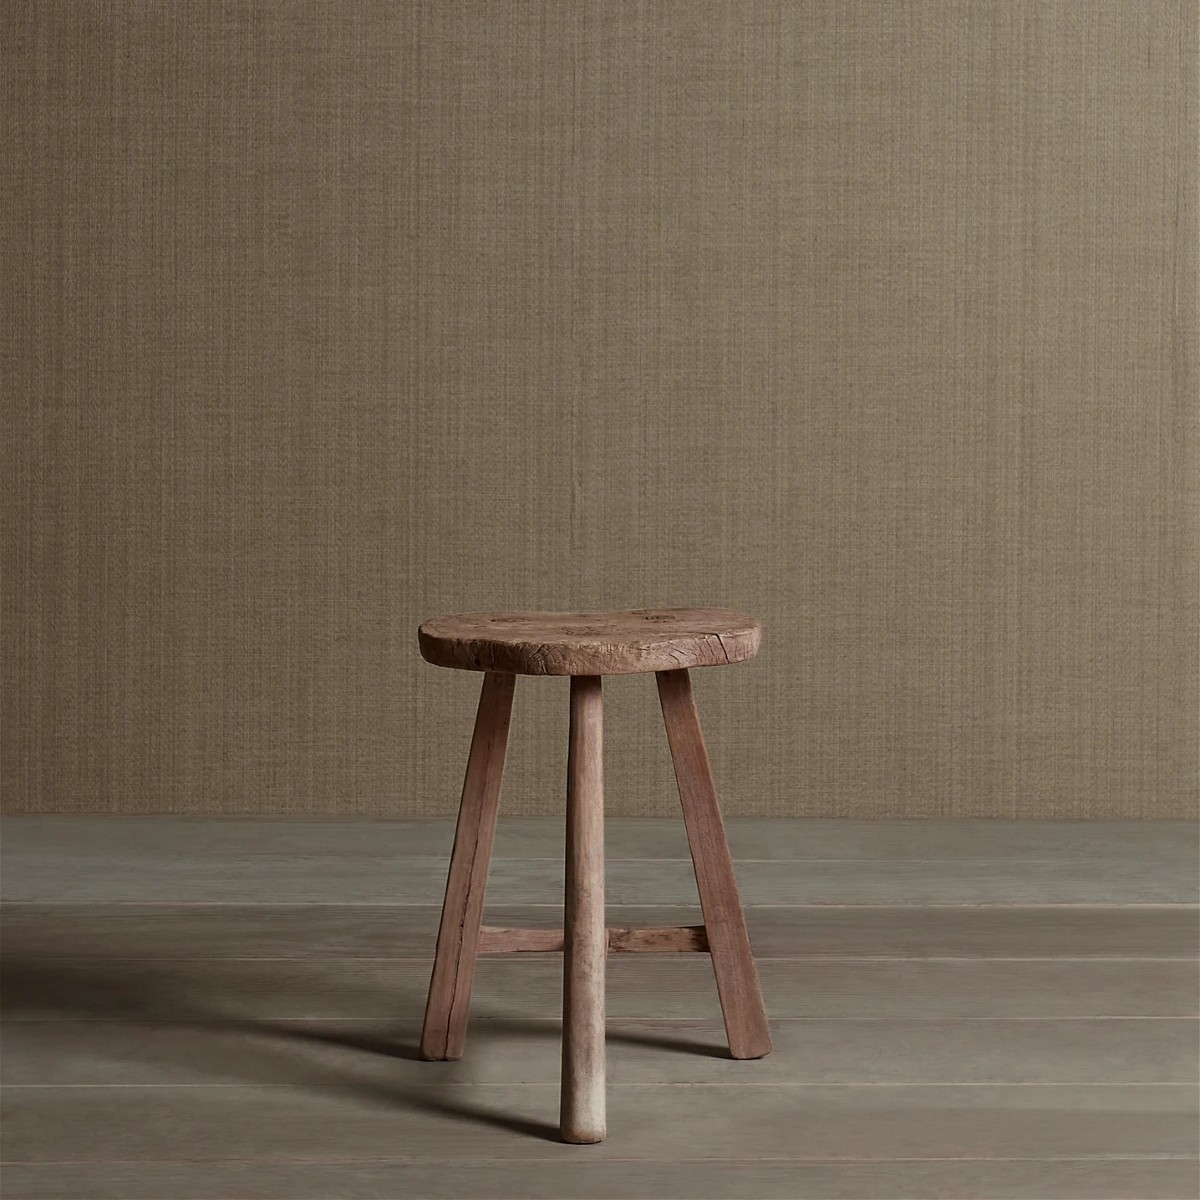 The image of an Elmwood and Pinewood Stool product